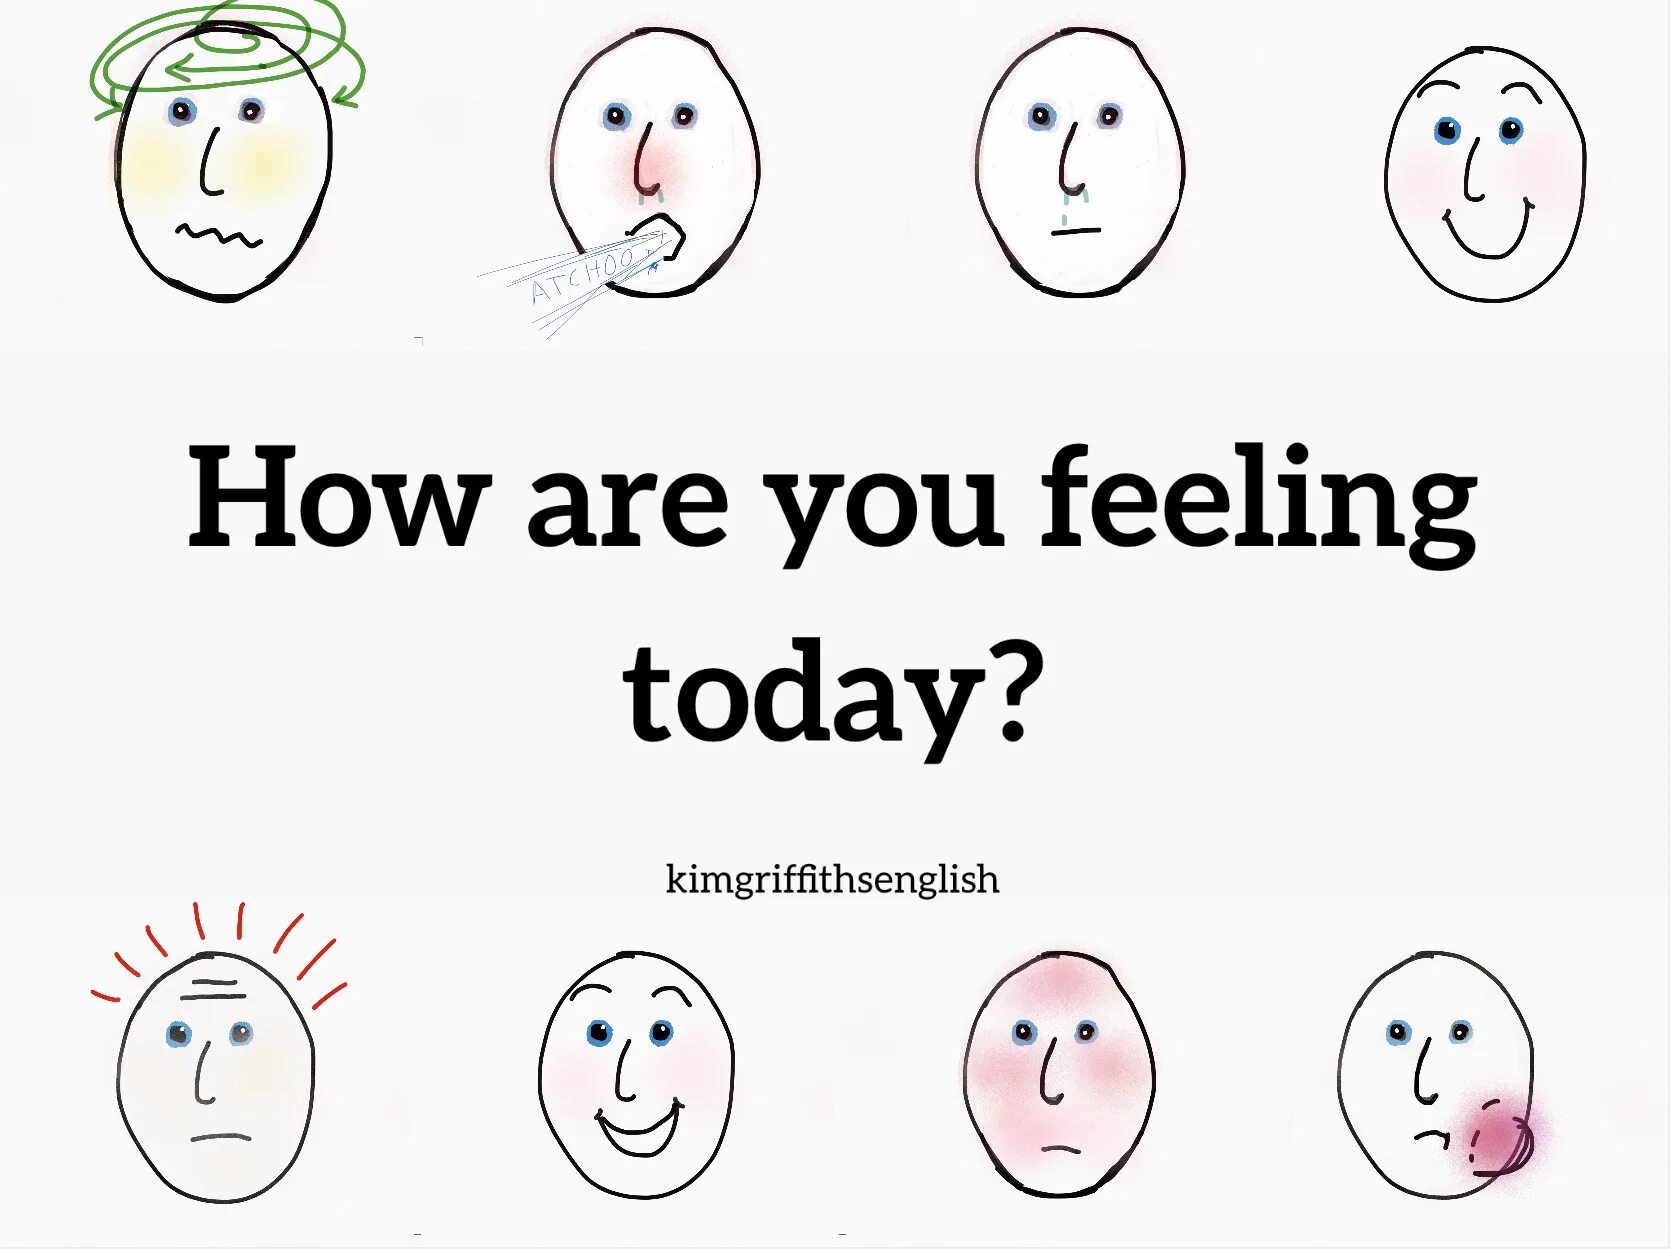 How are you feeling?. How are you feeling today. How are you картинки. How are you feeling today картинки. How does this feel